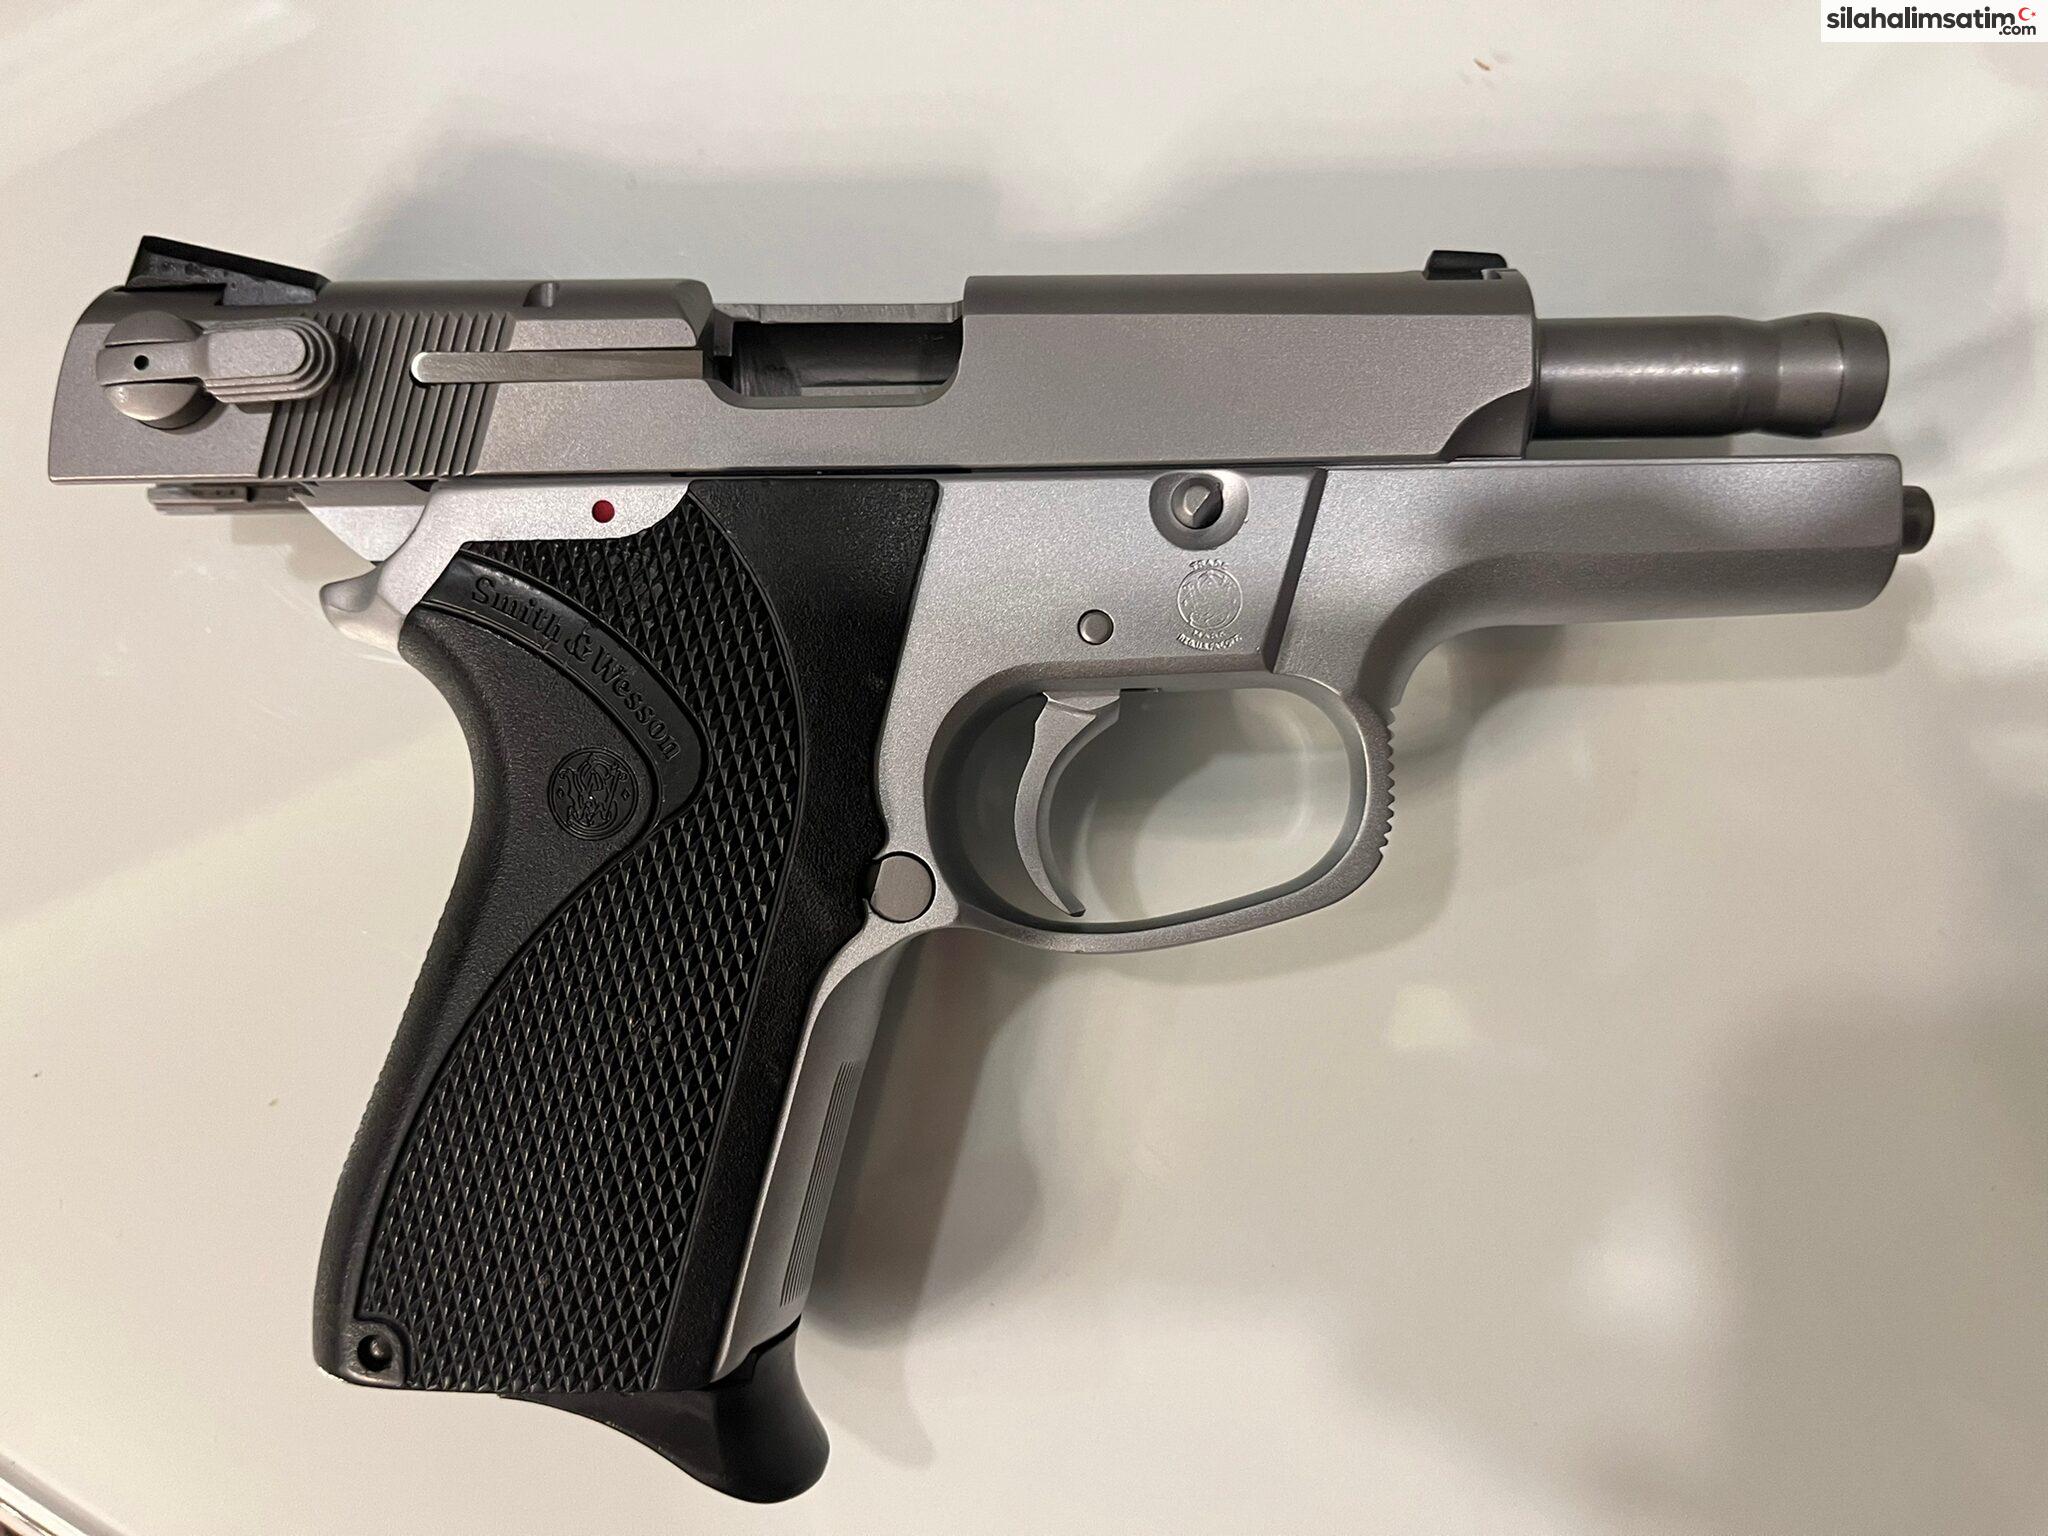 SMİTH WESSON 6906